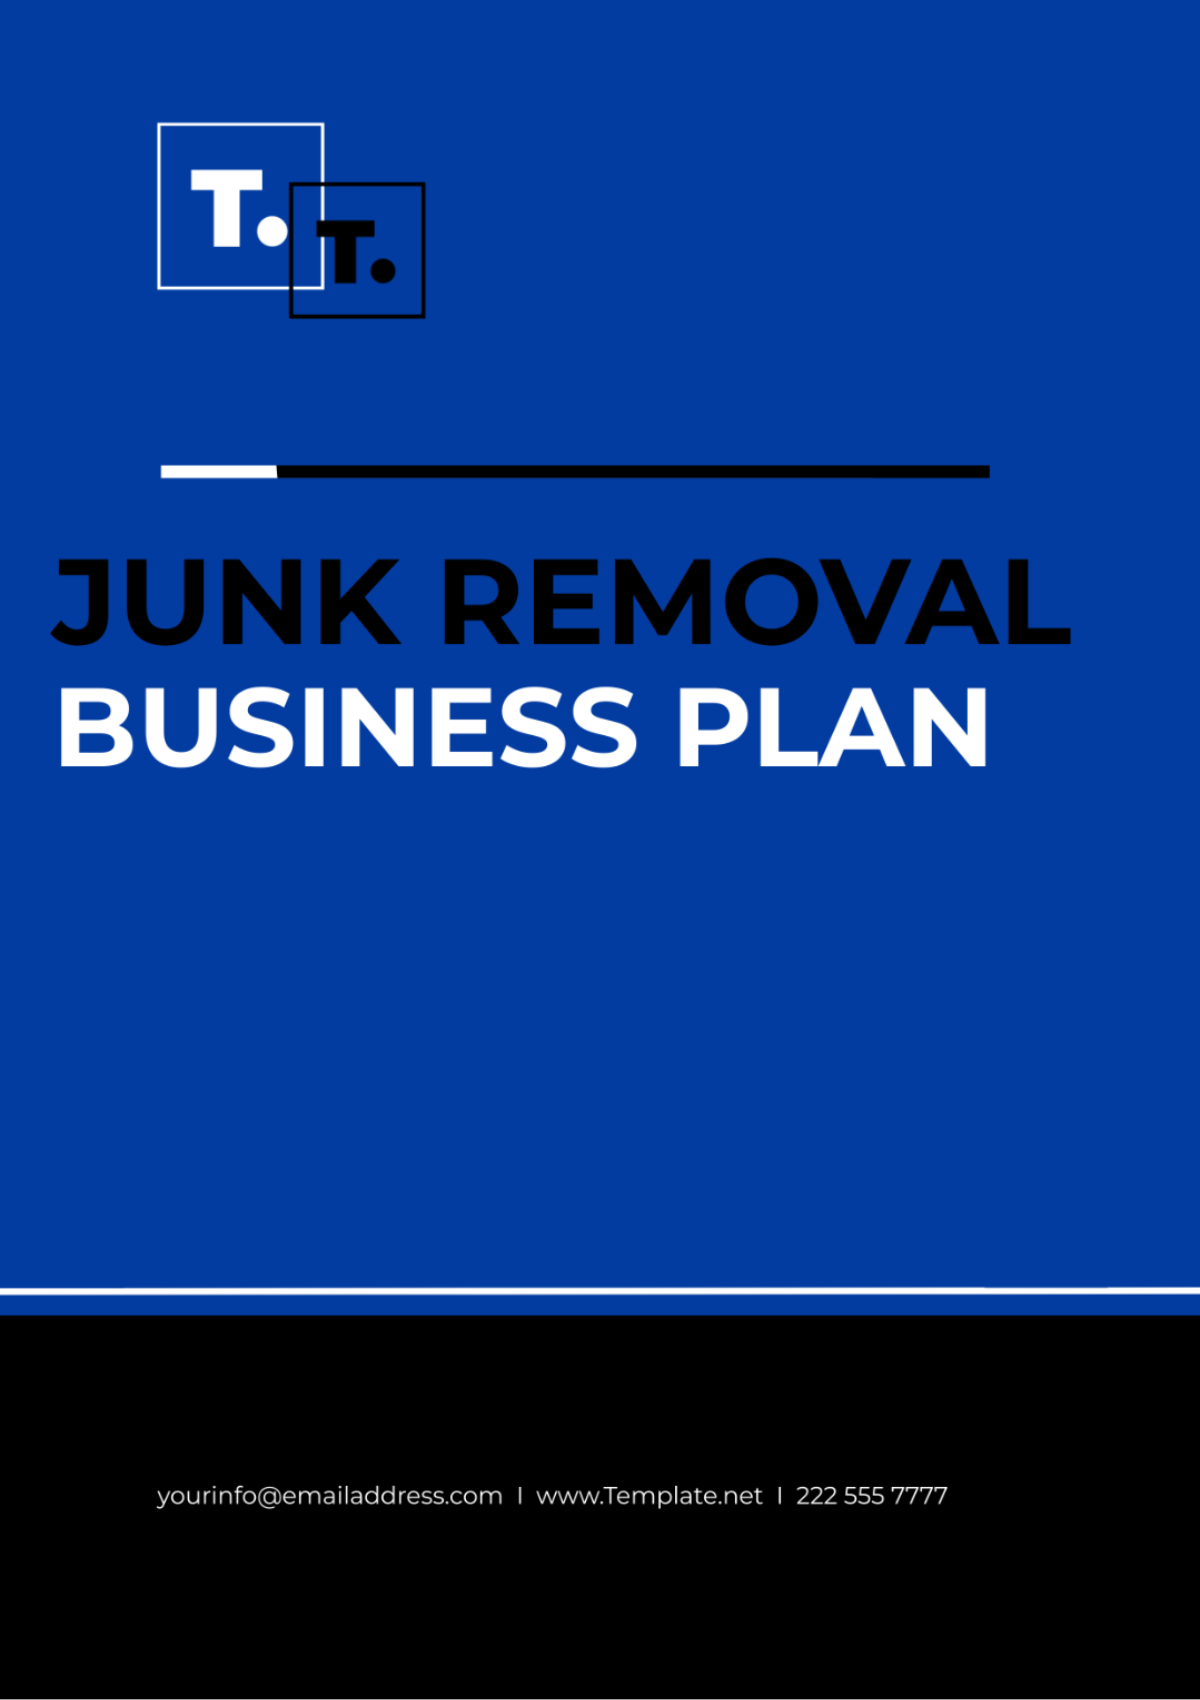 Free Junk Removal Business Plan Template